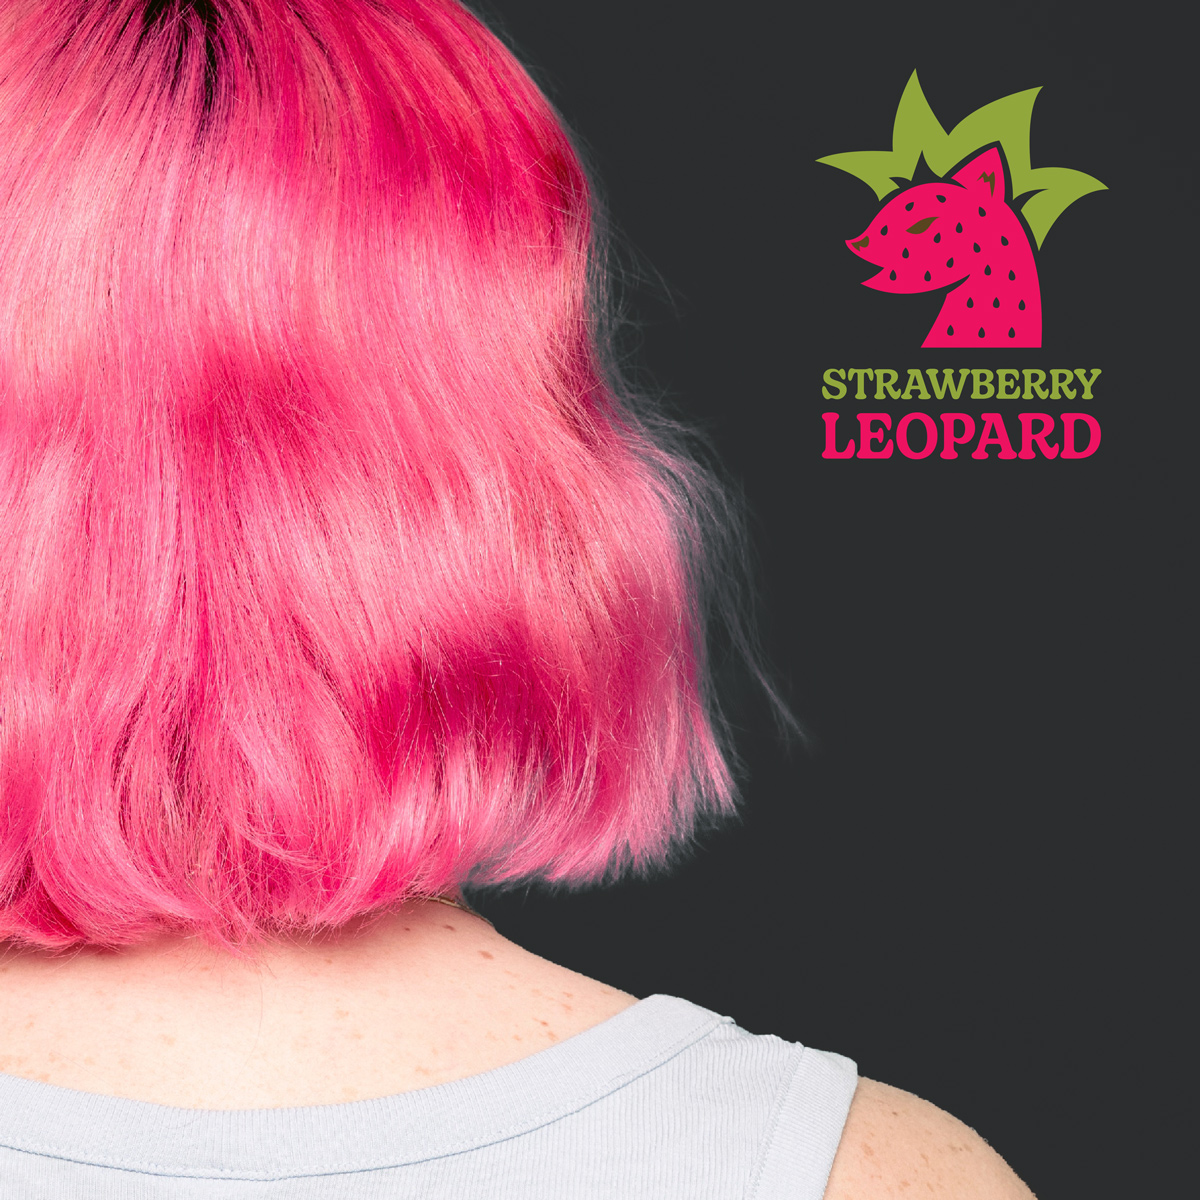 Photograph of a person with bright pink hair, Strawberry Leopard logo  featured on the right side of the photo.